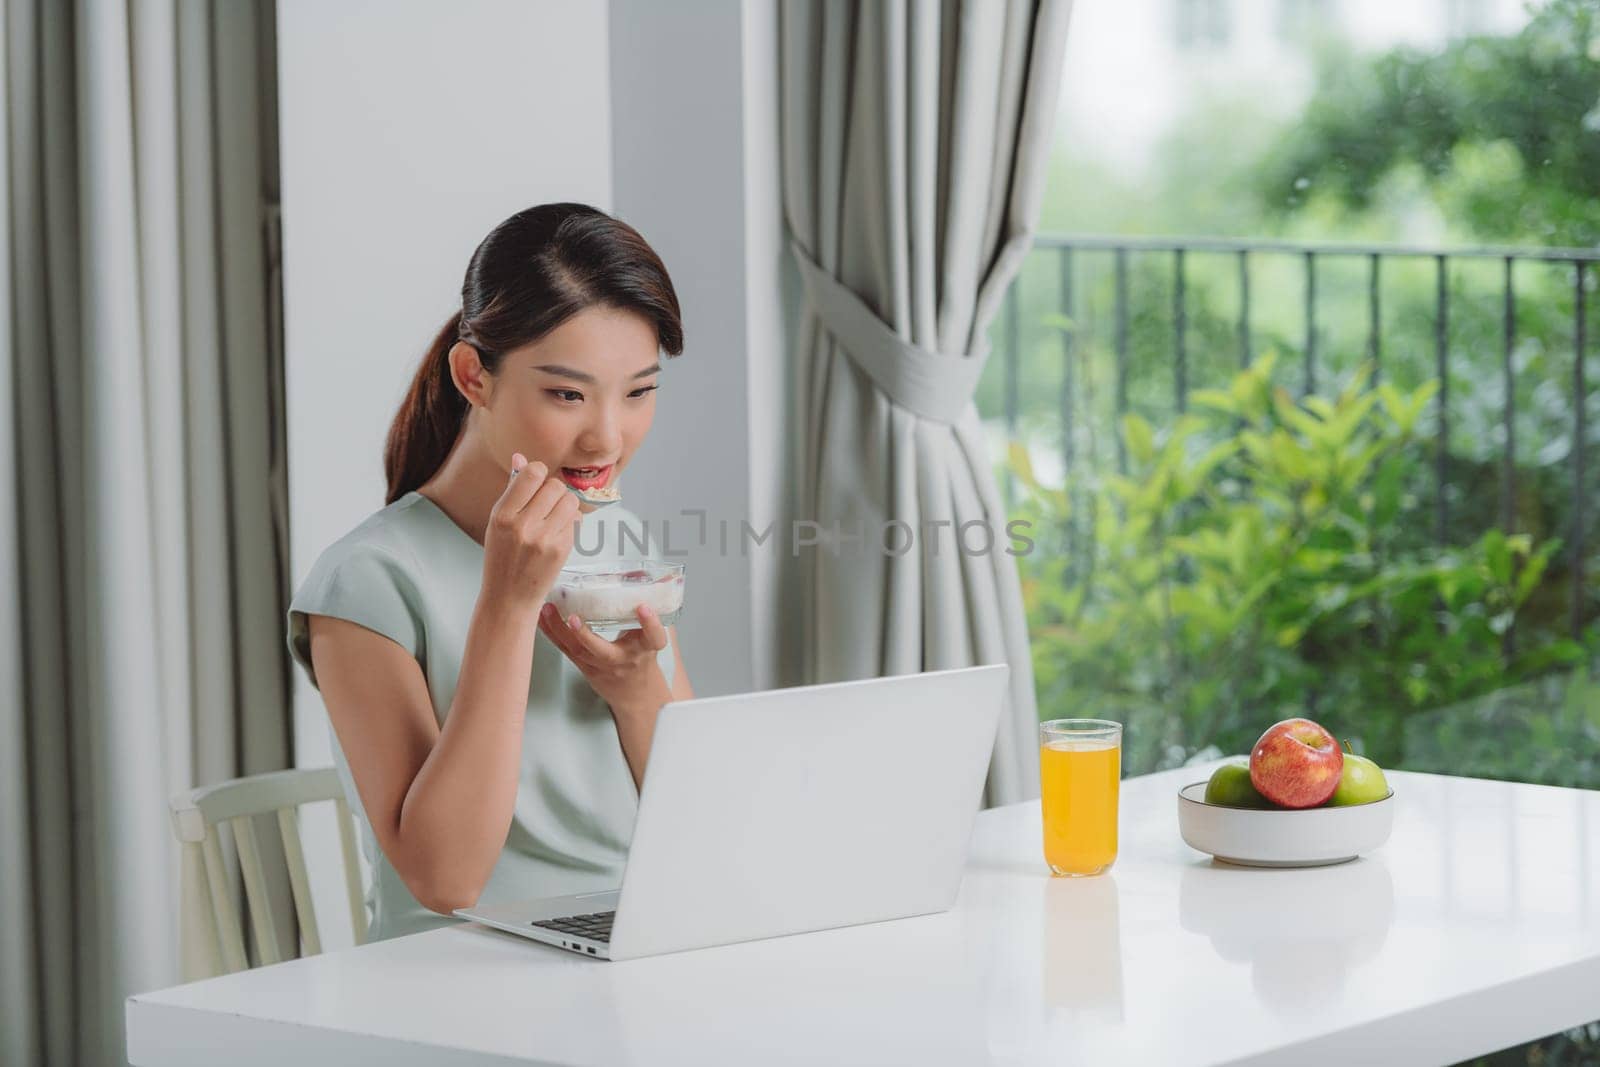 Smiling woman eating breakfast and looking at laptop on table